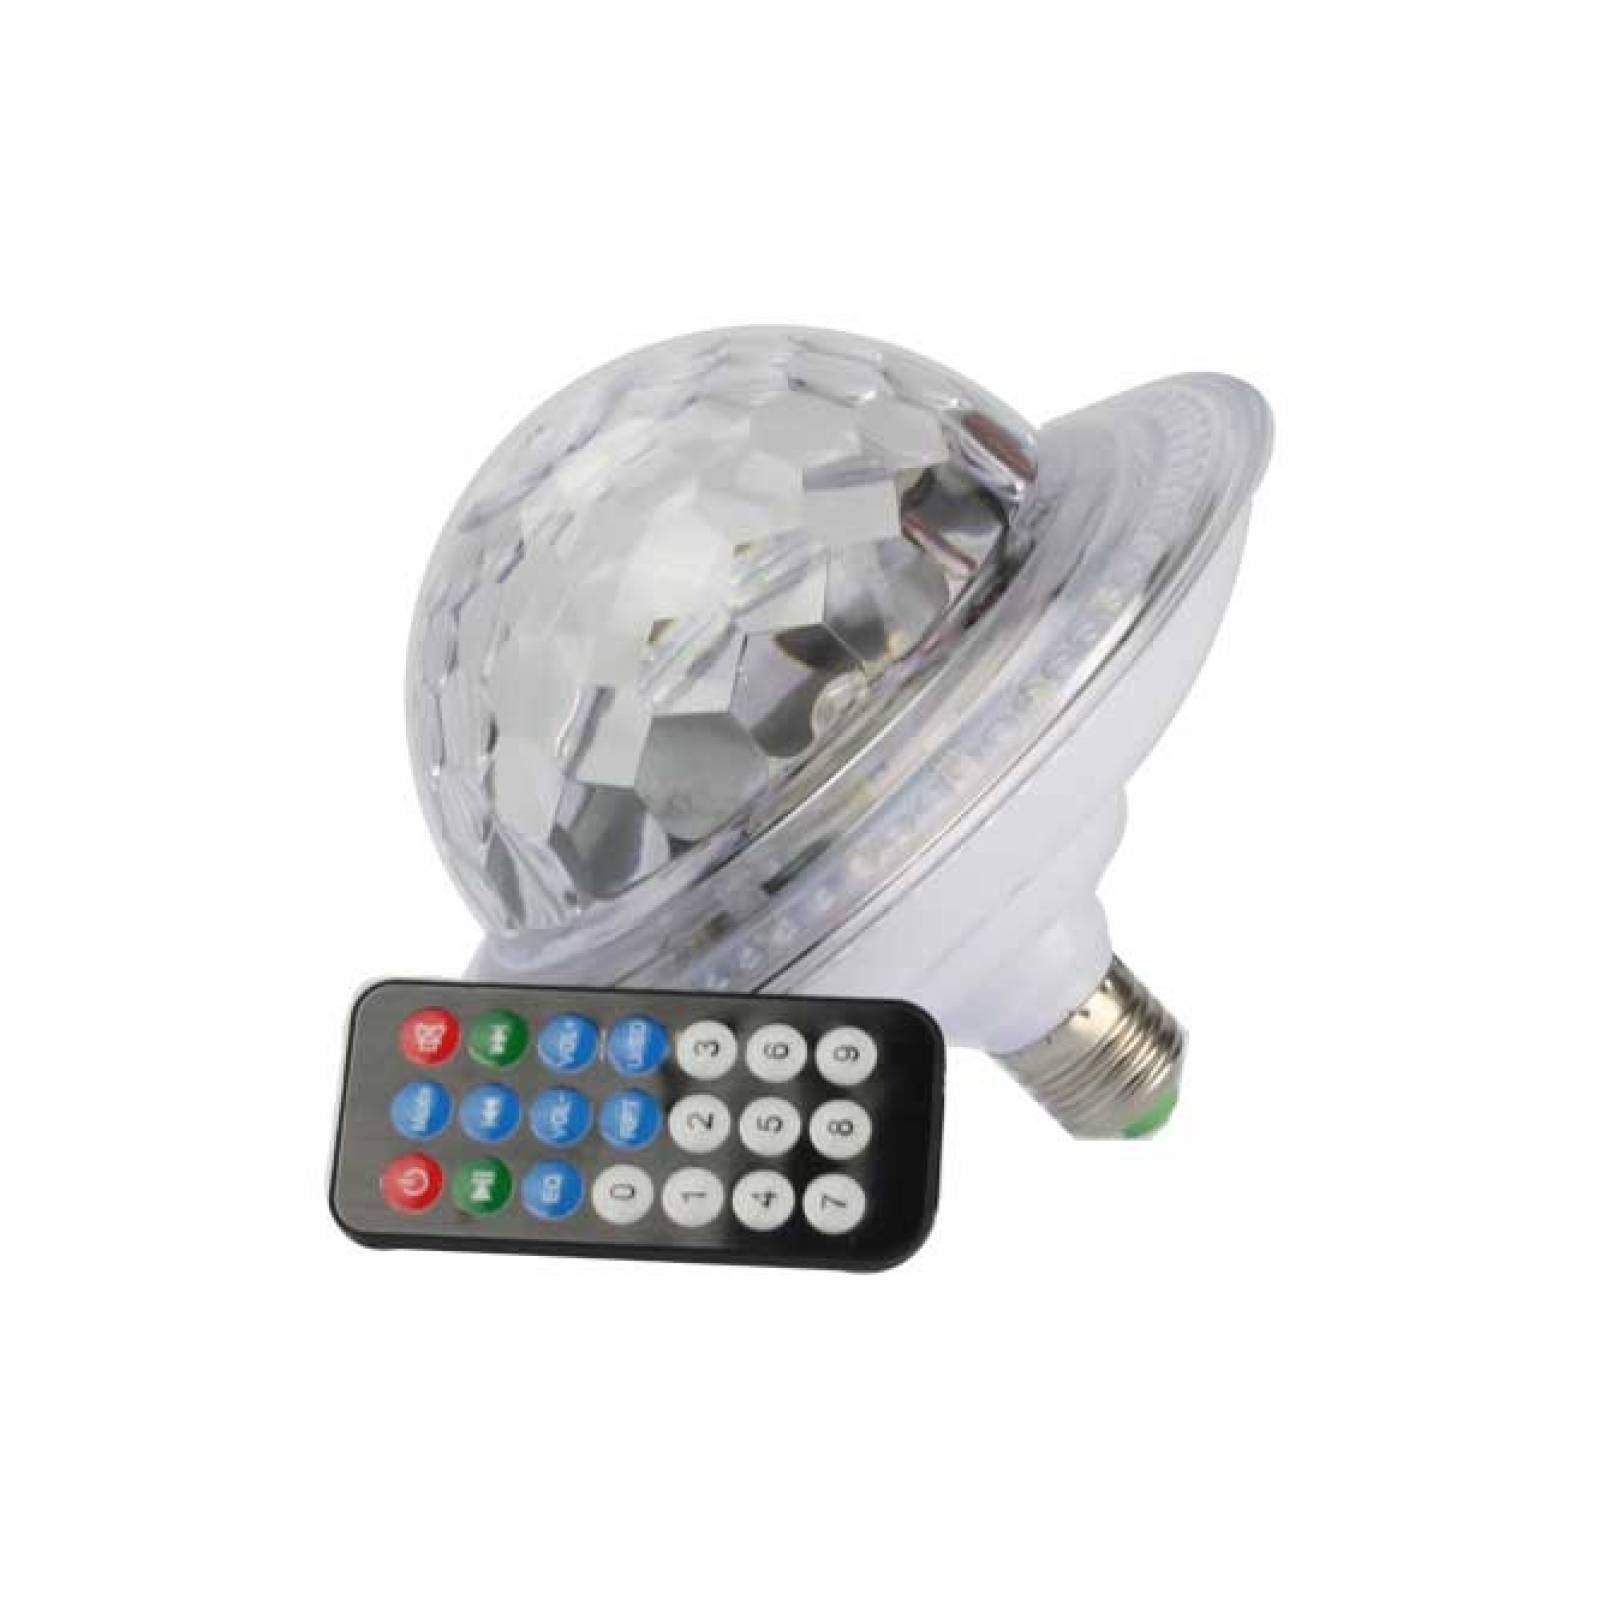 GENERICO Foco Proyector Led Plano Reflector 100w 240 Led Exterior